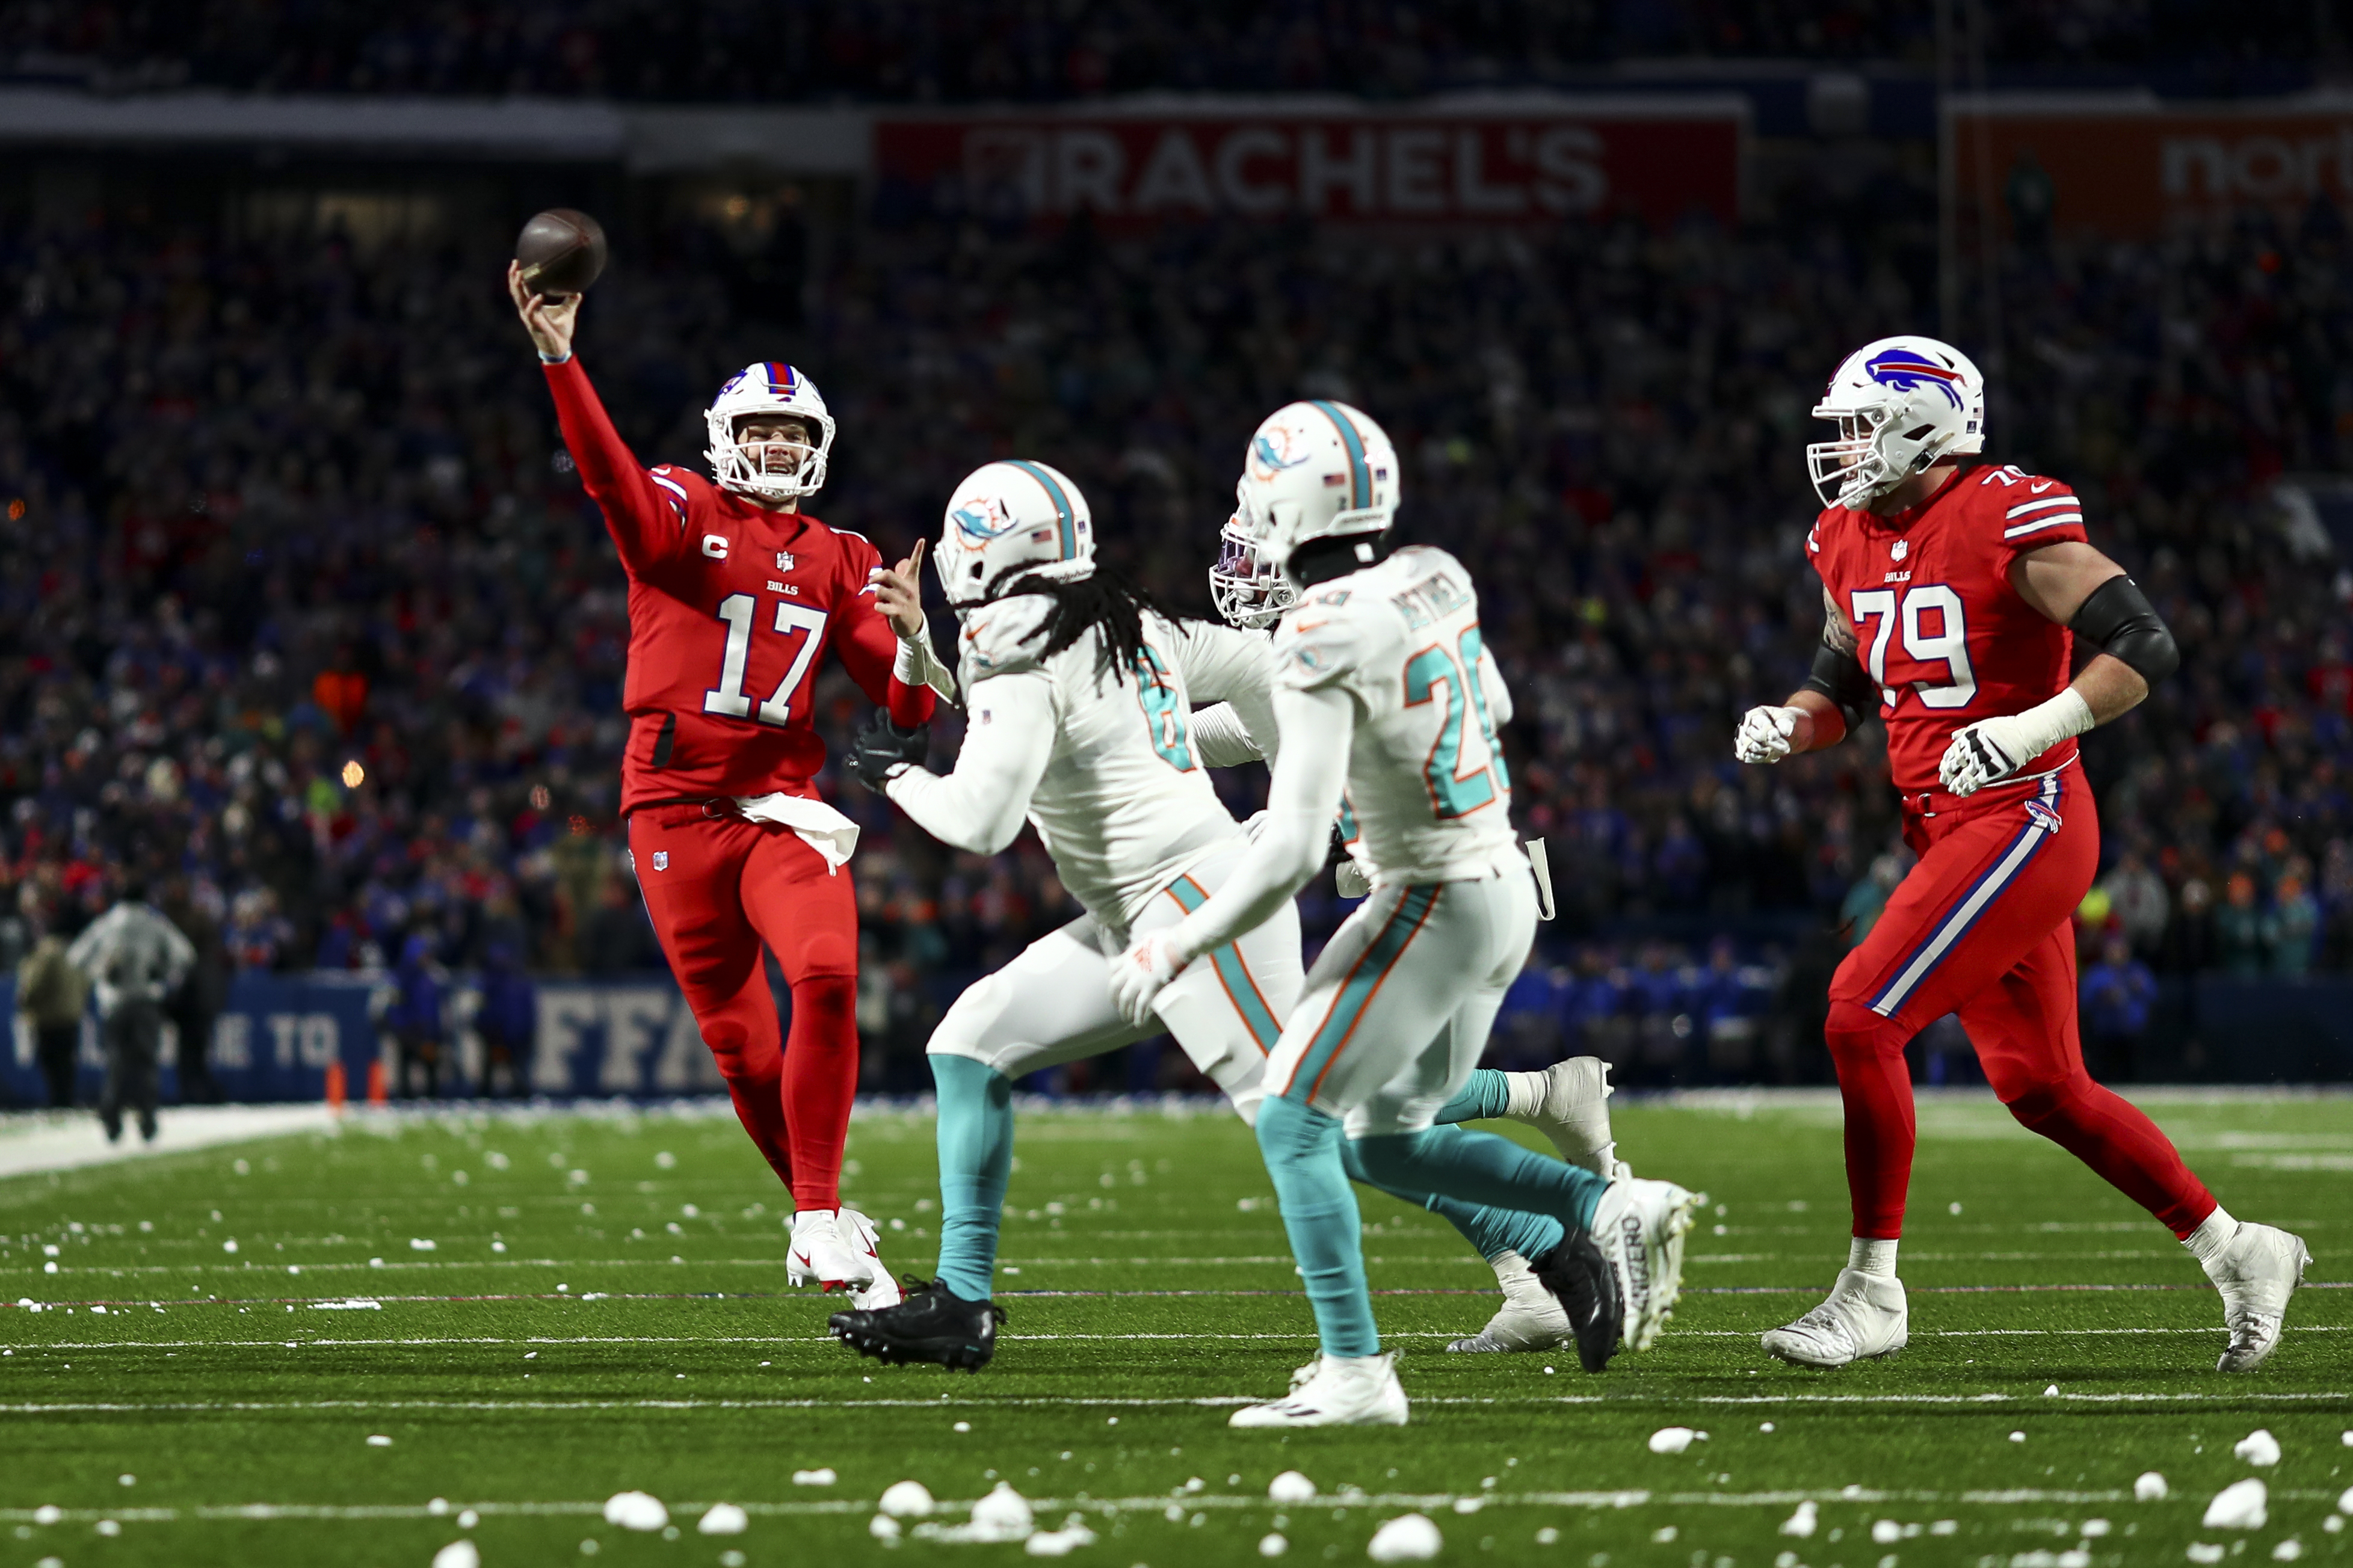 Quarterback Josh Allen (#17) of the Buffalo Bills passes in the game against the Miami Dolphins at Highmark Stadium in Orchard Park, New York, December 17, 2022. /CFP